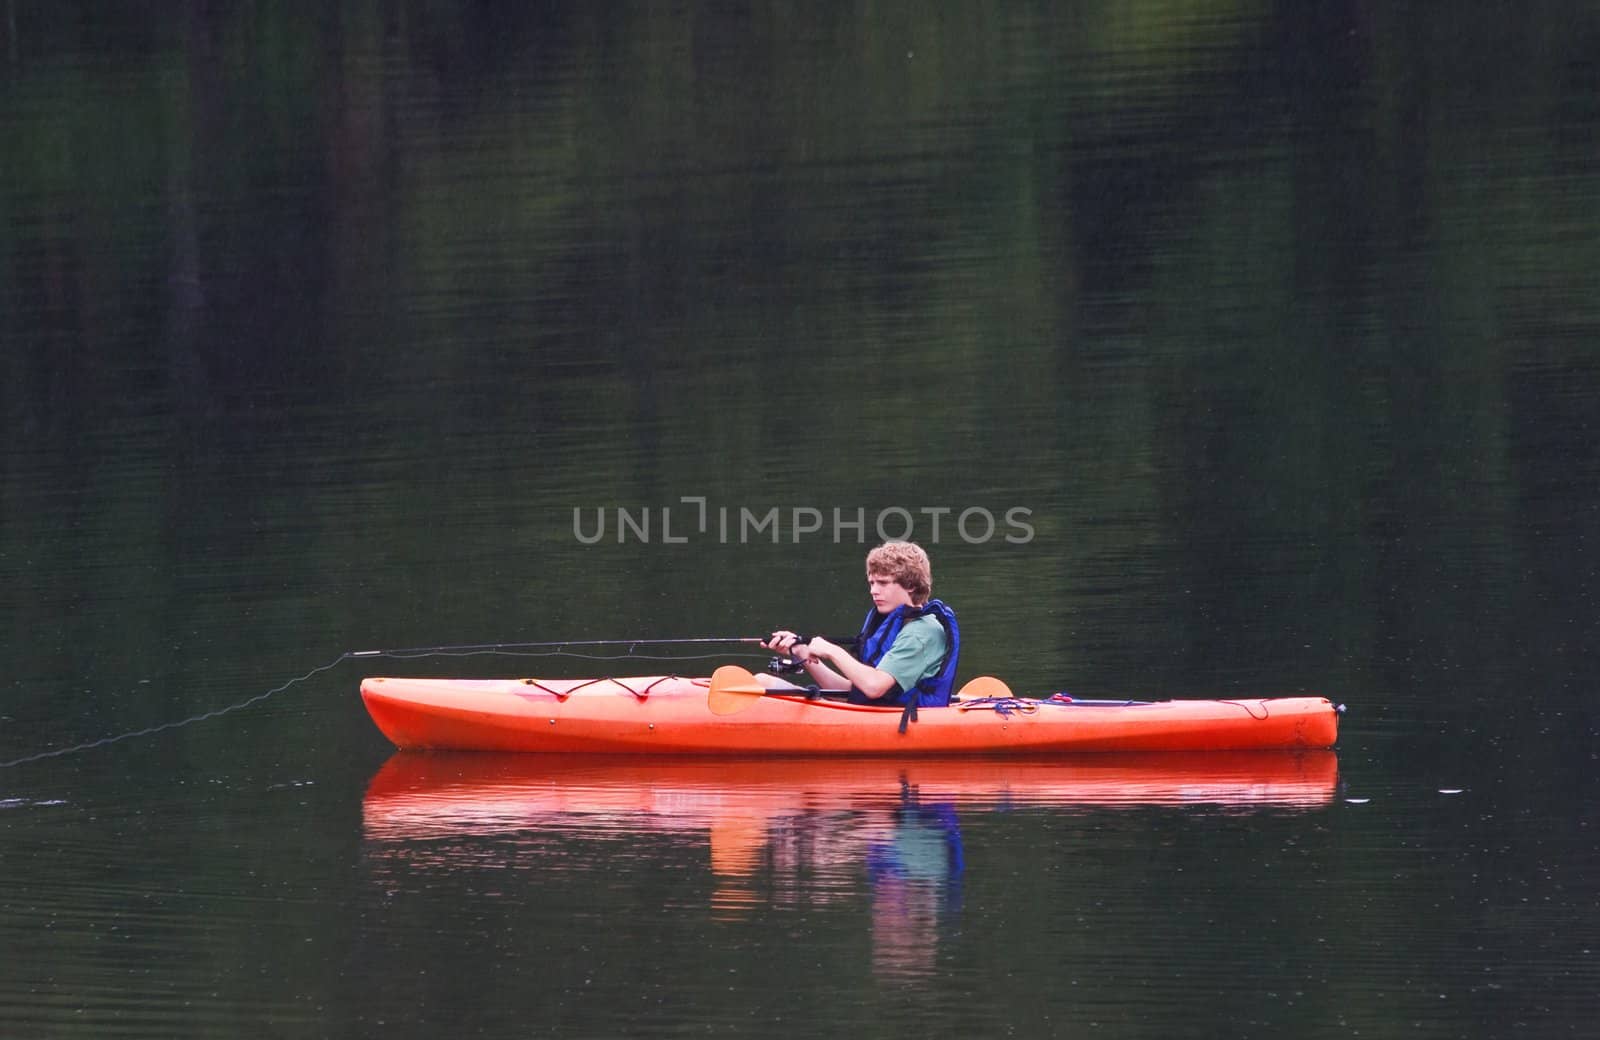 A young teenage boy fishing from a kayak in the evening. It is raining and streaks of rain can be seen against the lake background.